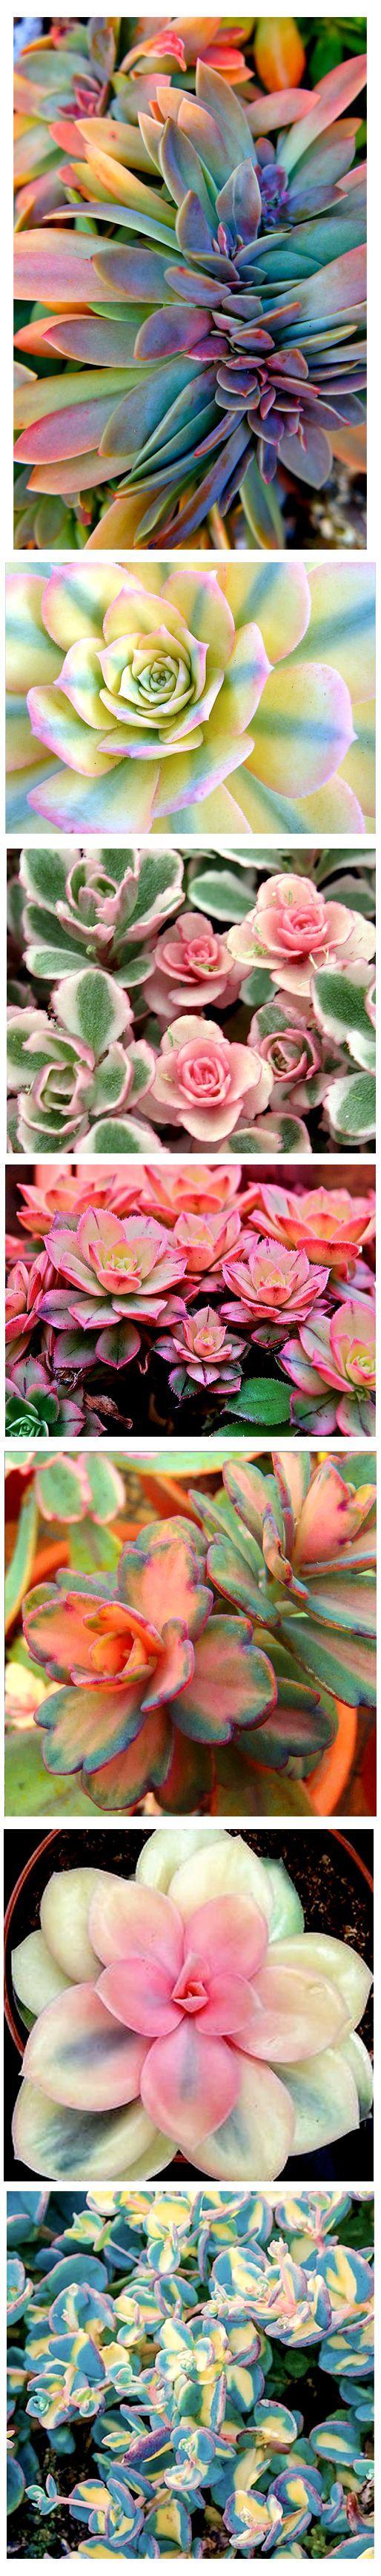 Свадьба - Variegated Succulents . Are These Real??? Would Love To Have Some Of These